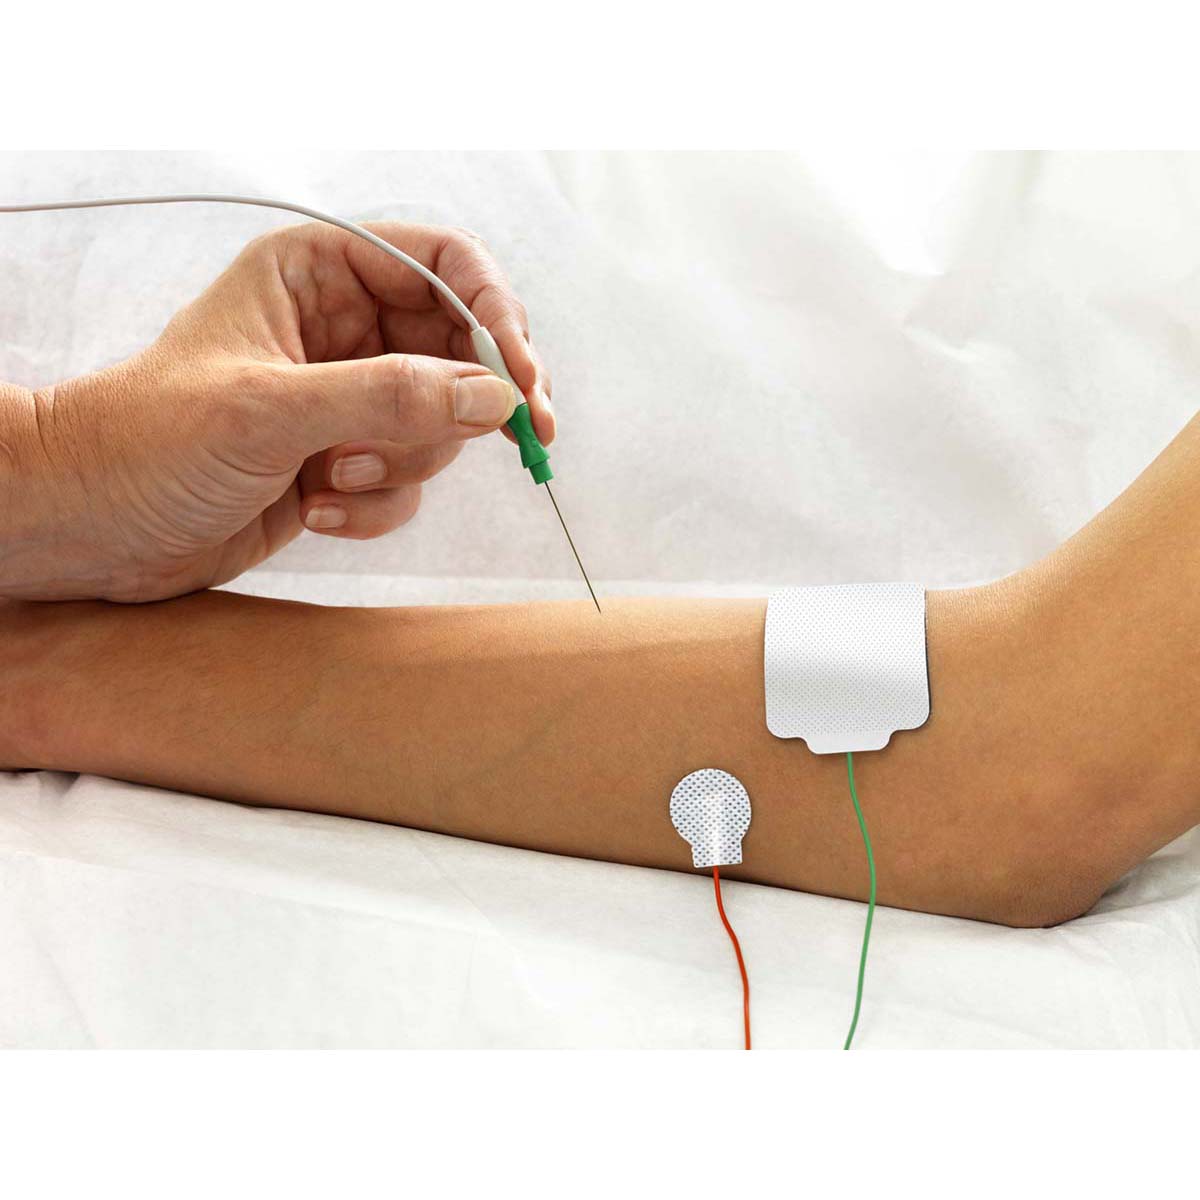 Technomed Disposable Concentric EMG Needle Electrode in use